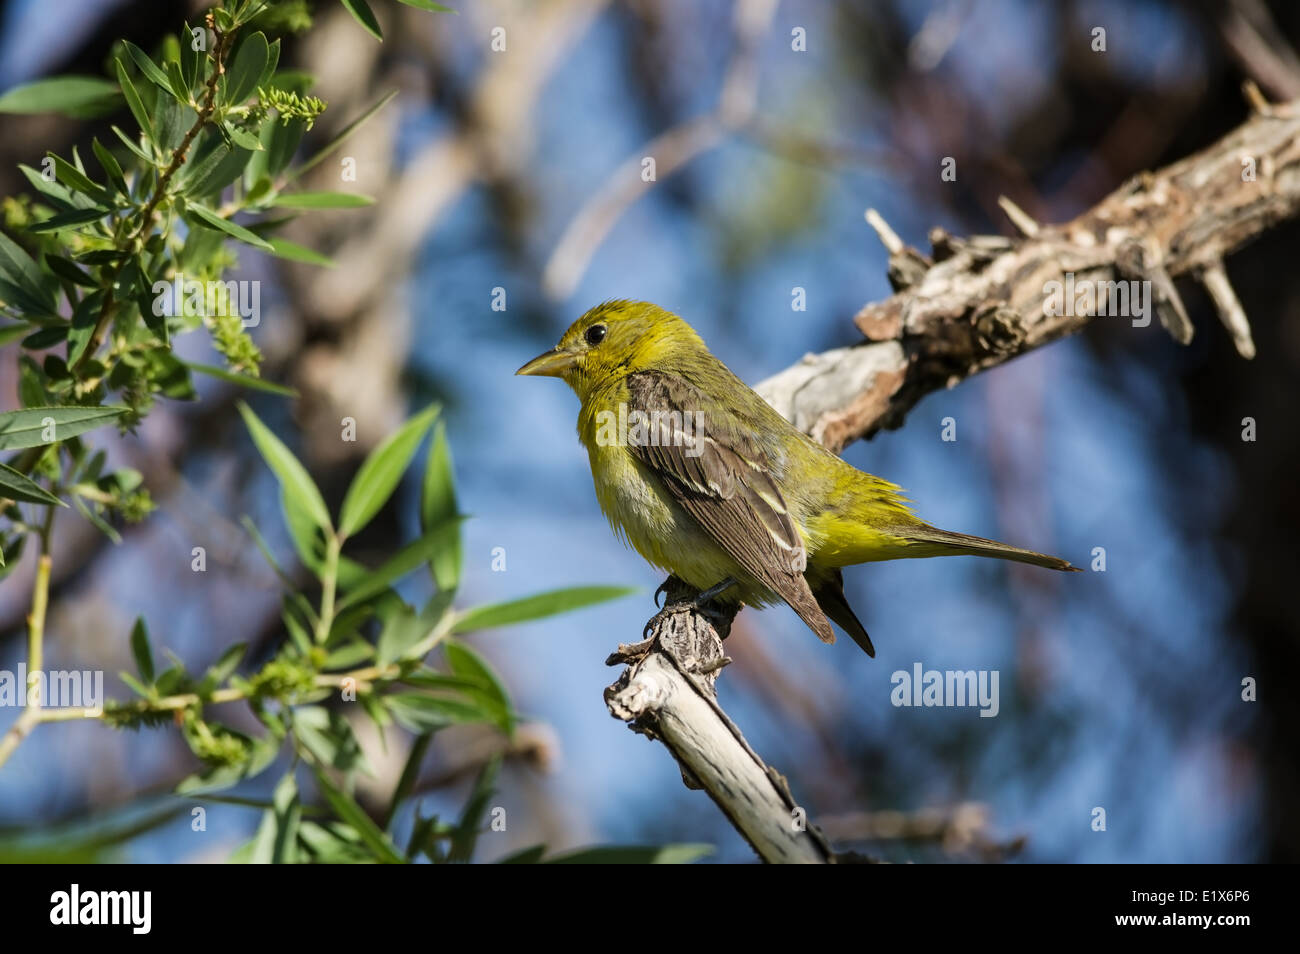 female western tanager bird perched on a branch Stock Photo